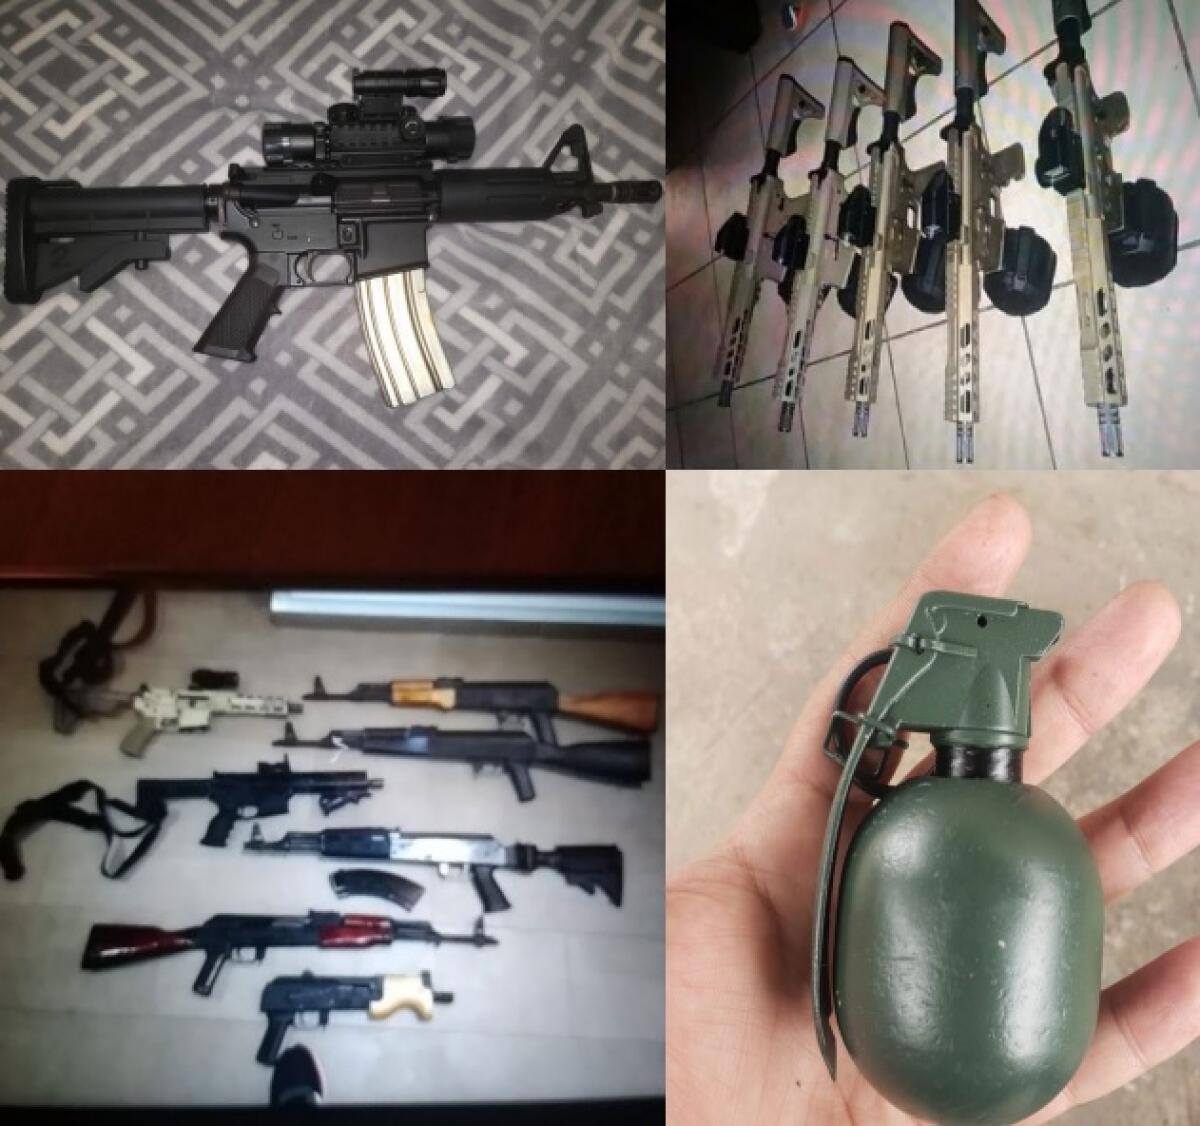 Alfredo Lomas Navarrete trafficked these weapons from U.S. to Mexico on behalf of a Sinaloa cartel drug trafficking cell